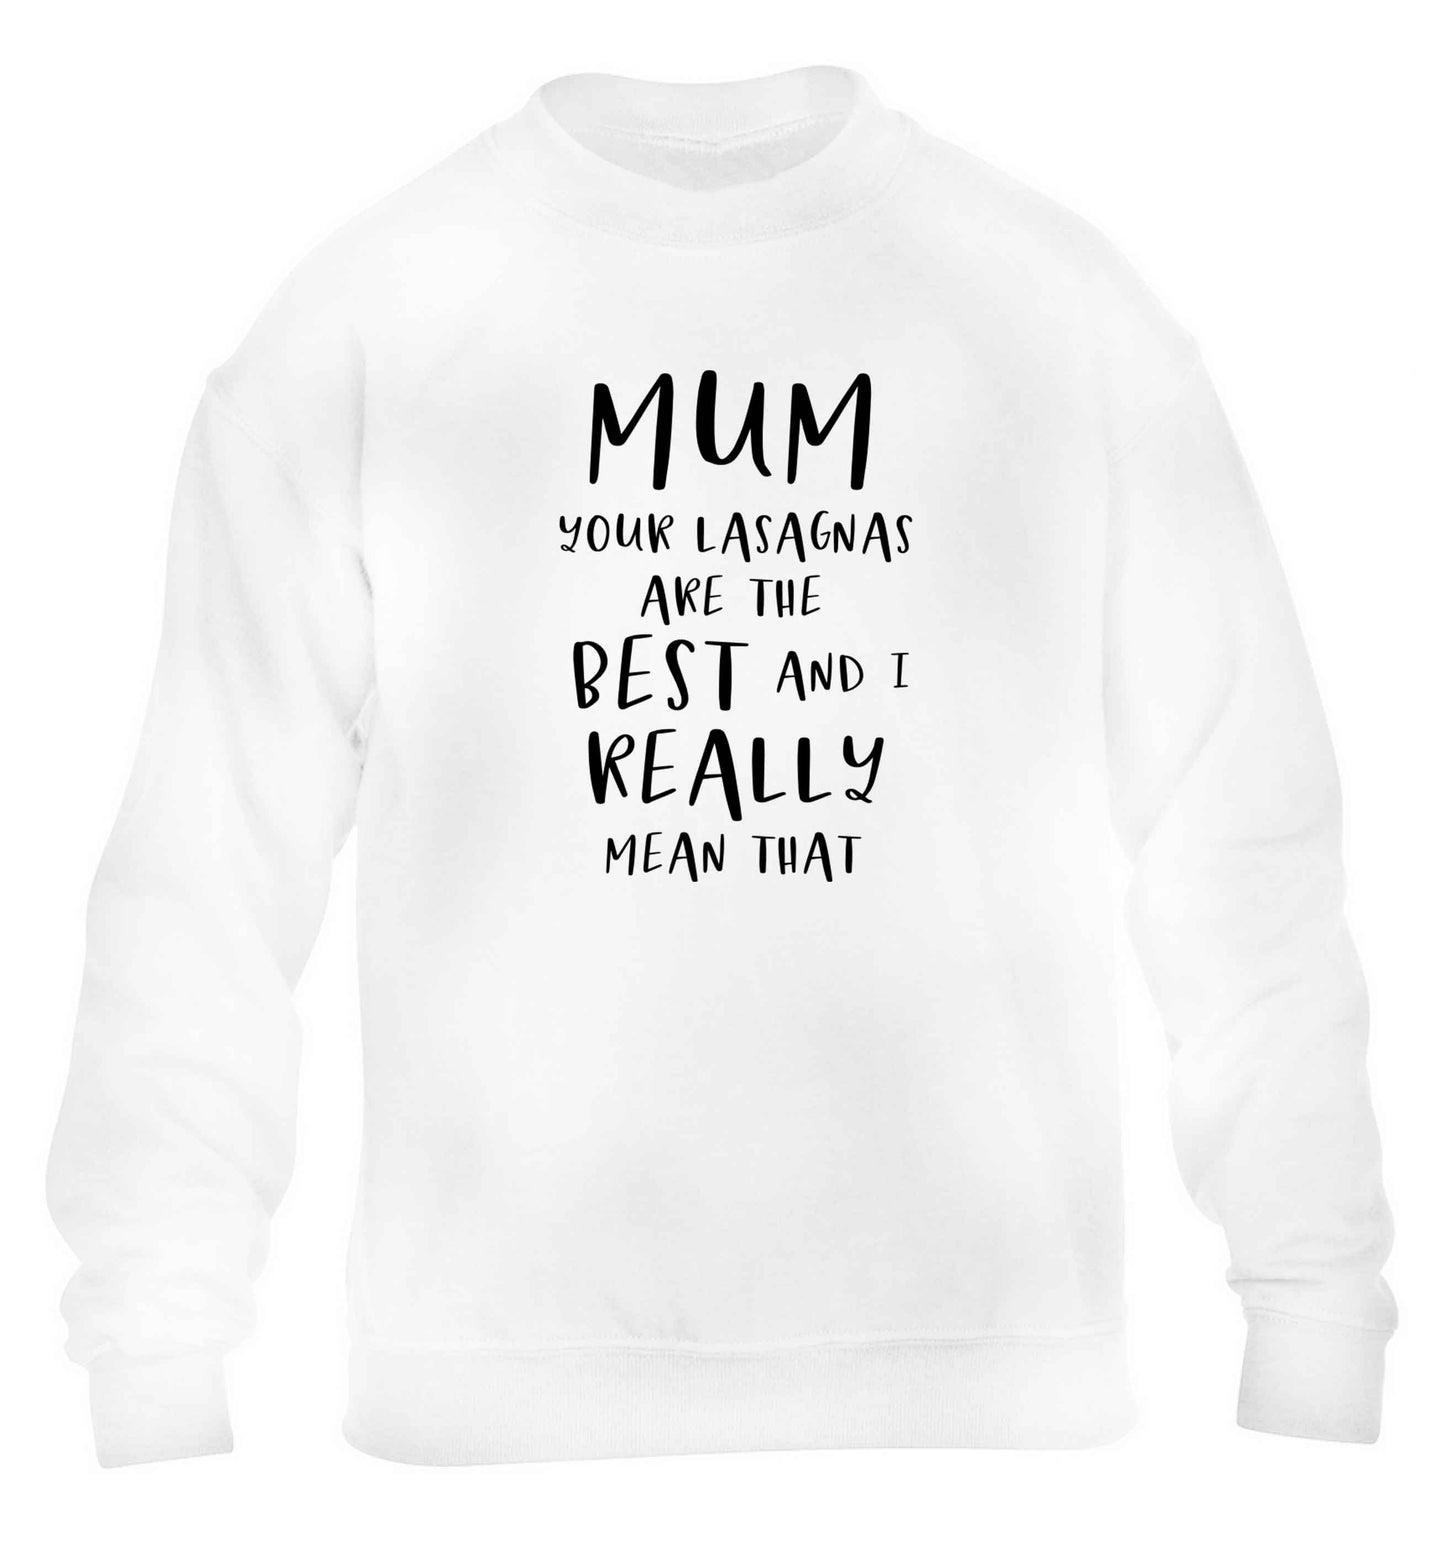 Funny gifts for your mum on mother's dayor her birthday! Mum your lasagnas are the best and I really mean that children's white sweater 12-13 Years